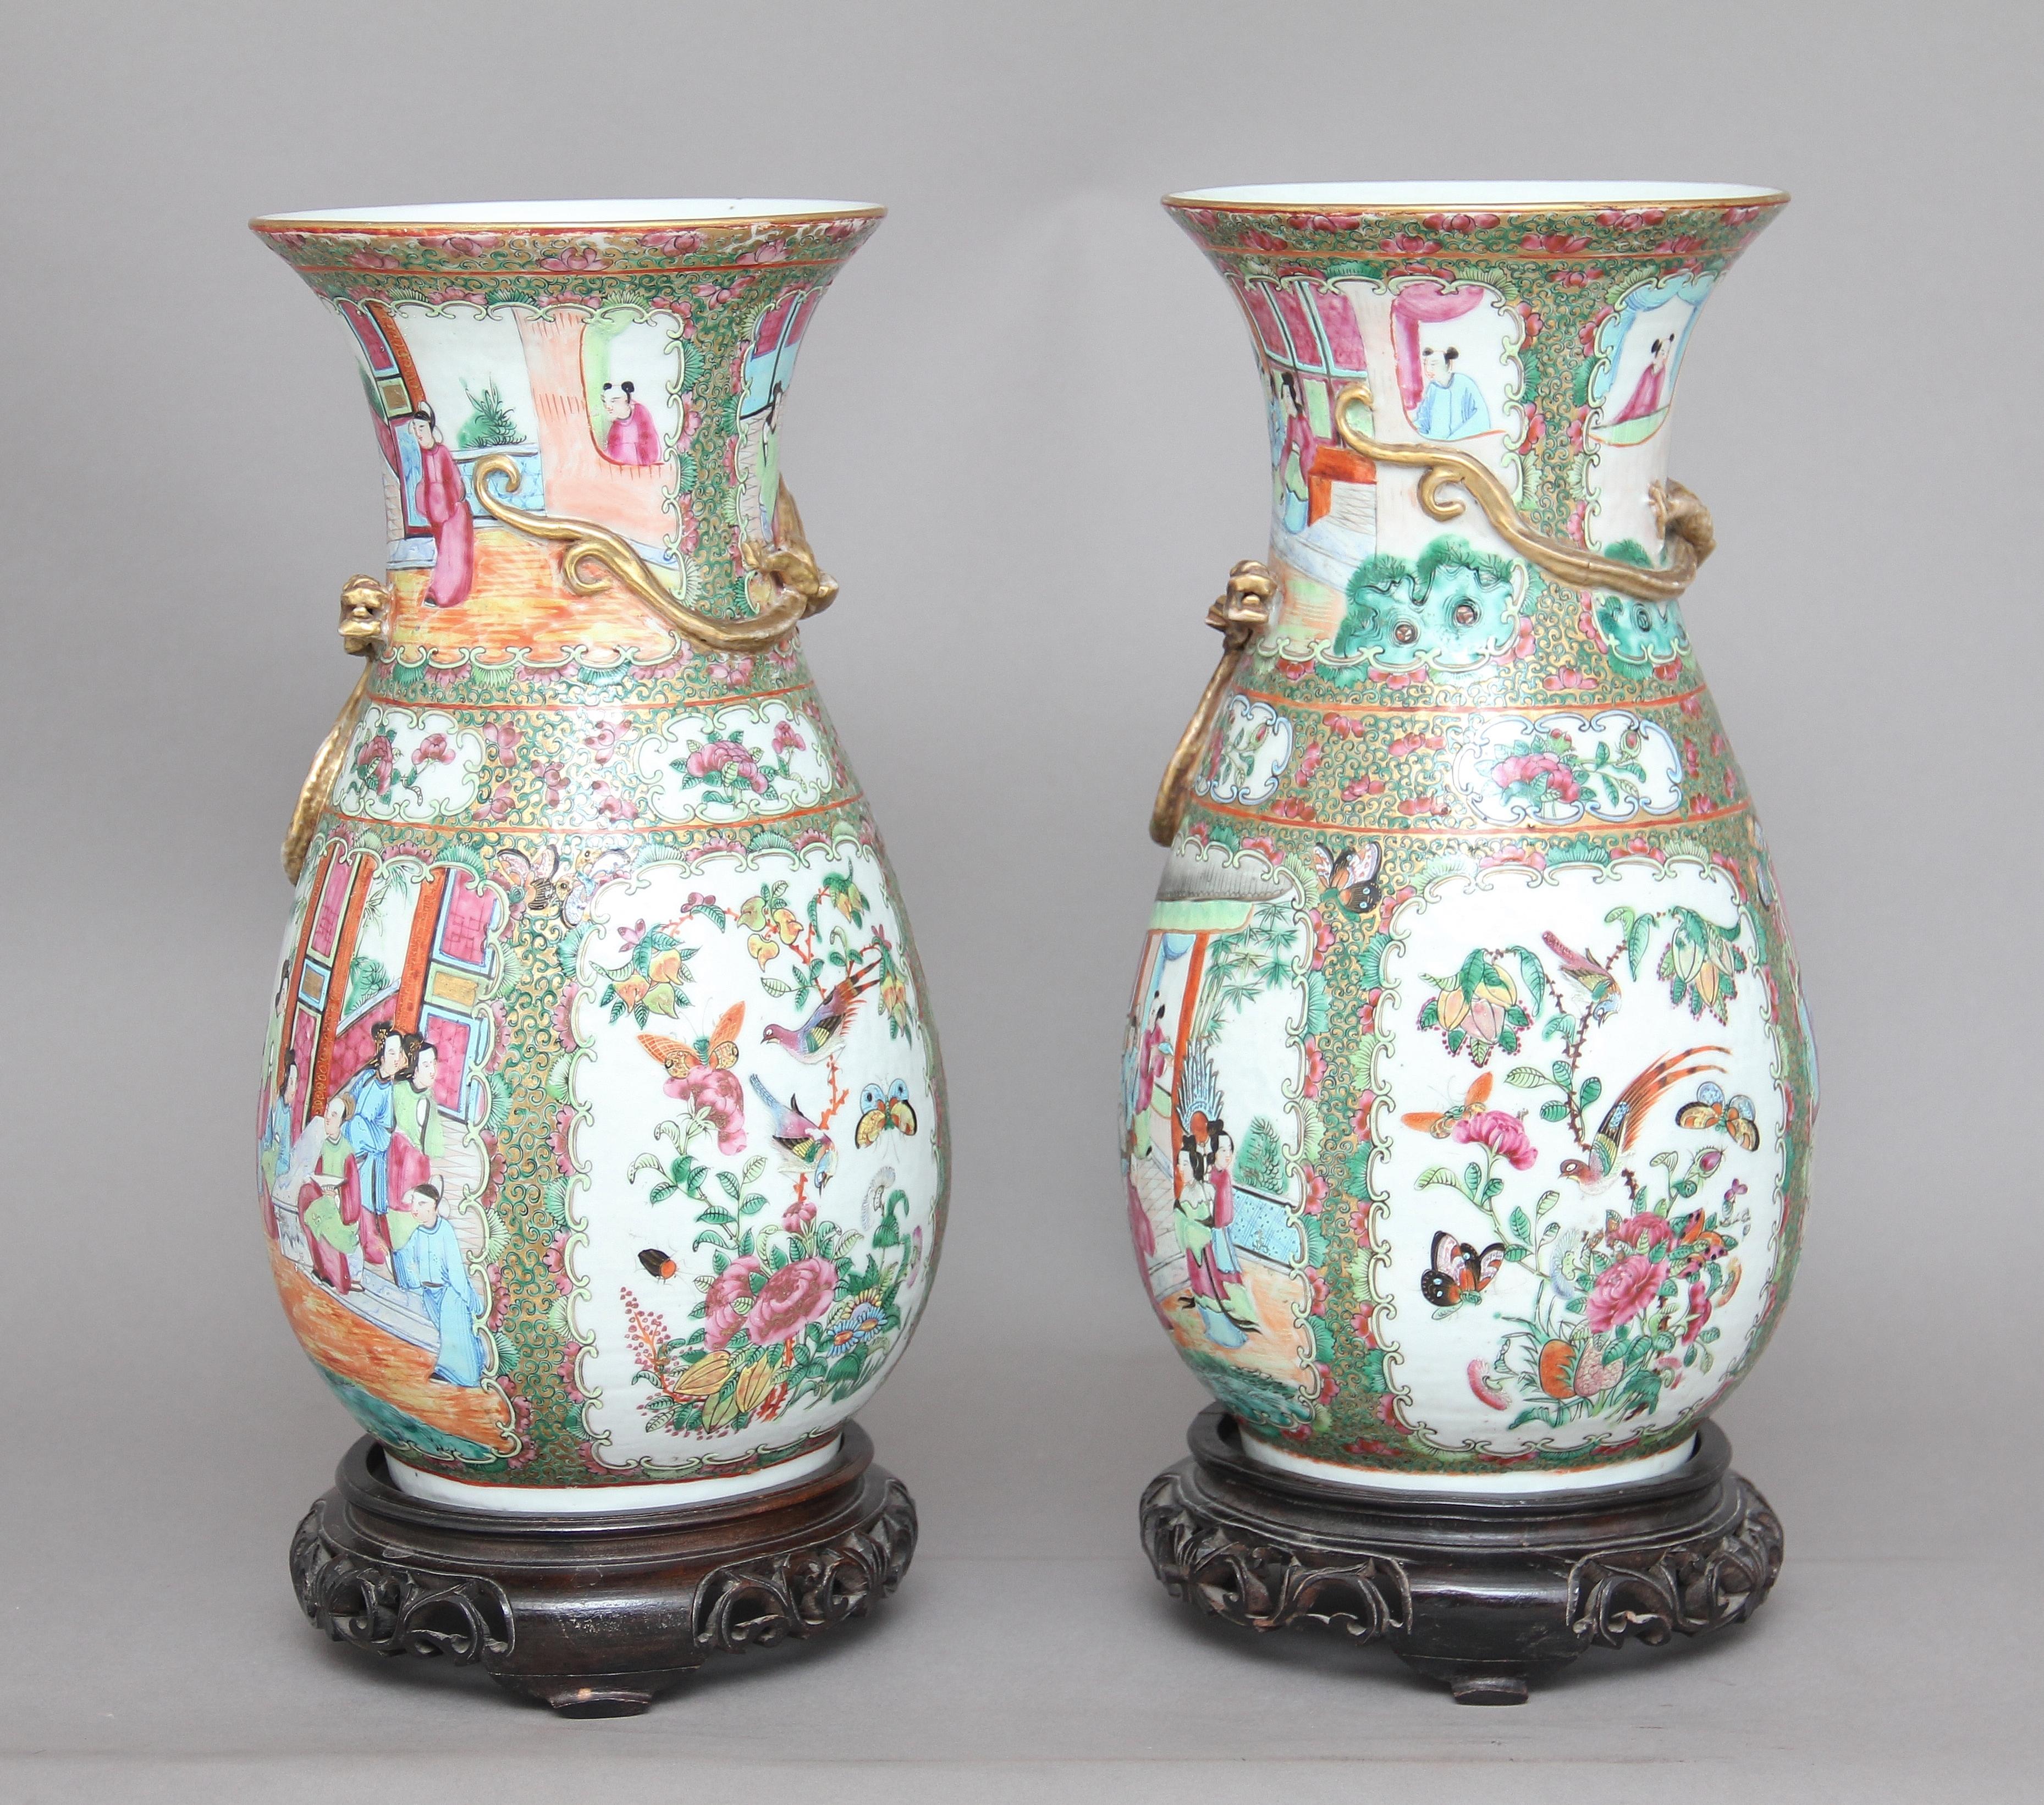 A decorative pair of 19th century Chinese famile rose vases depicting various Chinese scenes and various birds and foliage, each vase decorated with a single gilded raised dragon, standing on pierced hardwood bases. In fantastic condition having